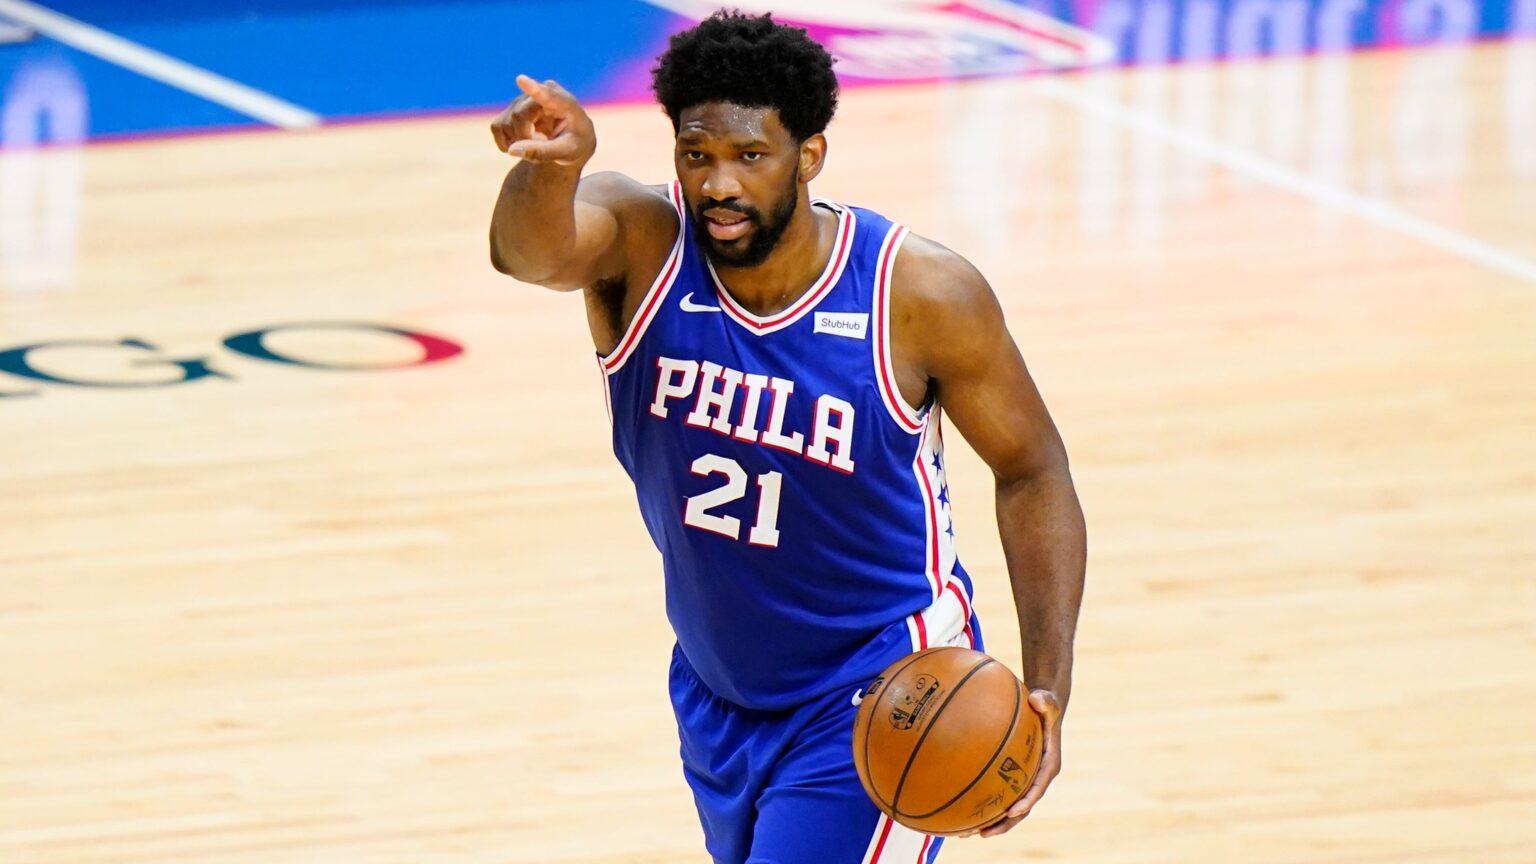 76ers vs Hawks Game 3 Preview: Can Embiid’s Continued Excellence Propel Philadelphia to a 2-1 Series Lead in Atlanta?